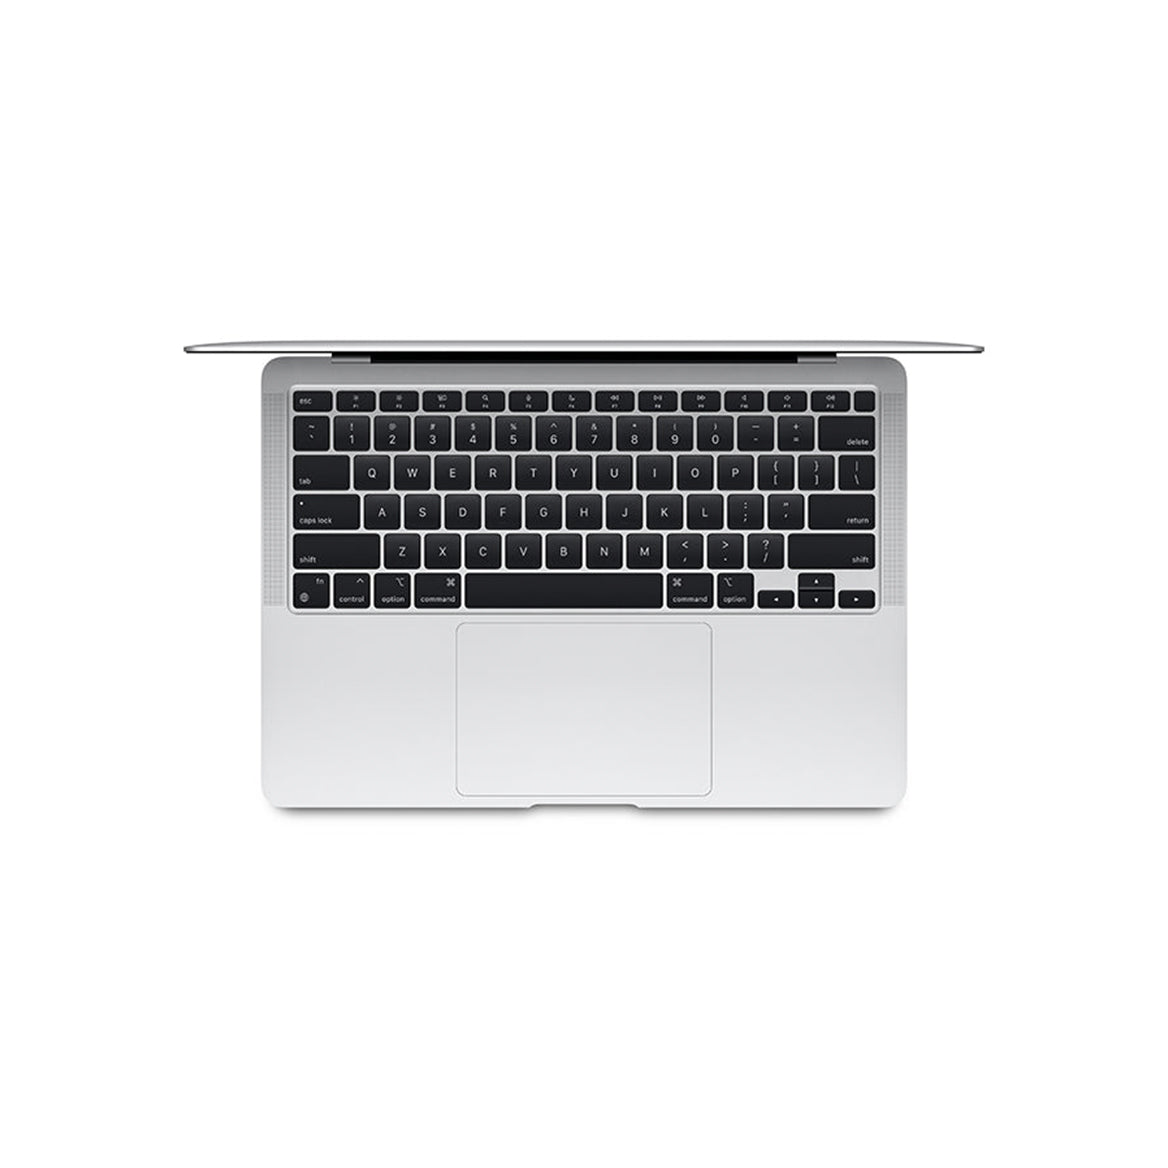 MacBook Air M1 2020 silver up side view